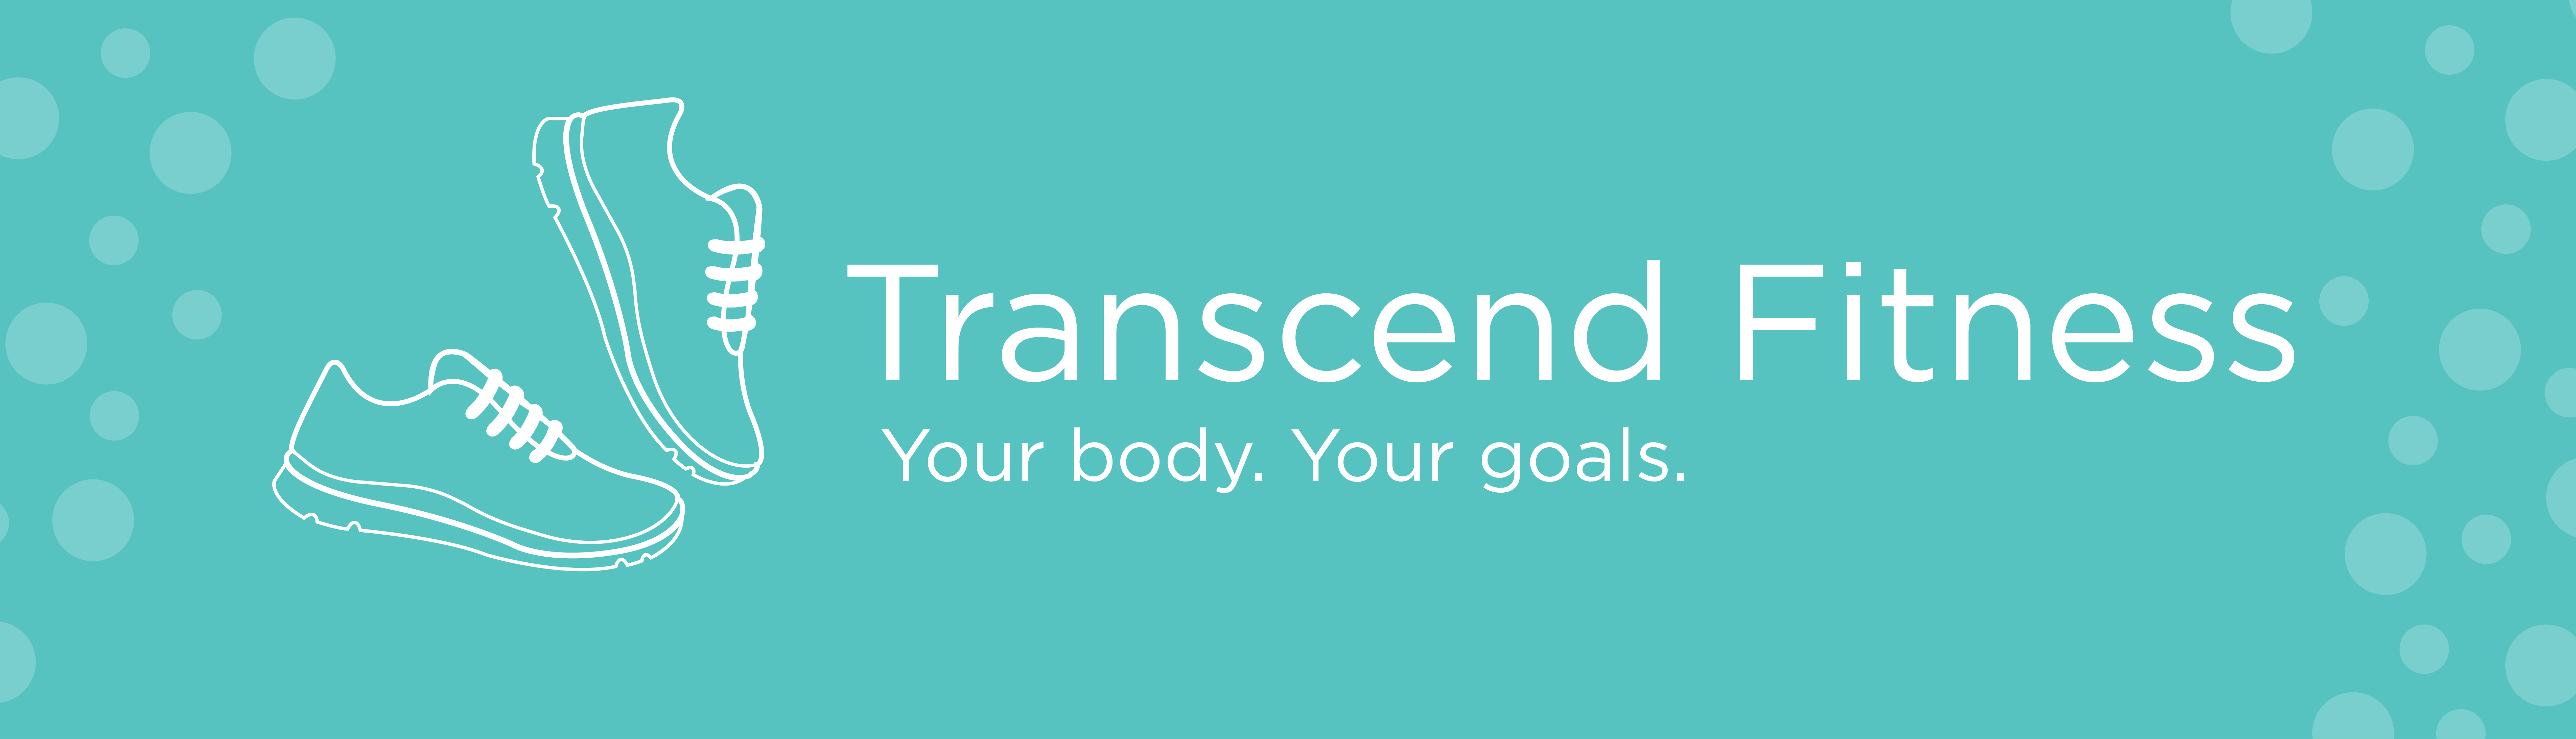 Vector art of running shoes on a green background. The banner reads "Transcend Fitness. Your body. Your goals."